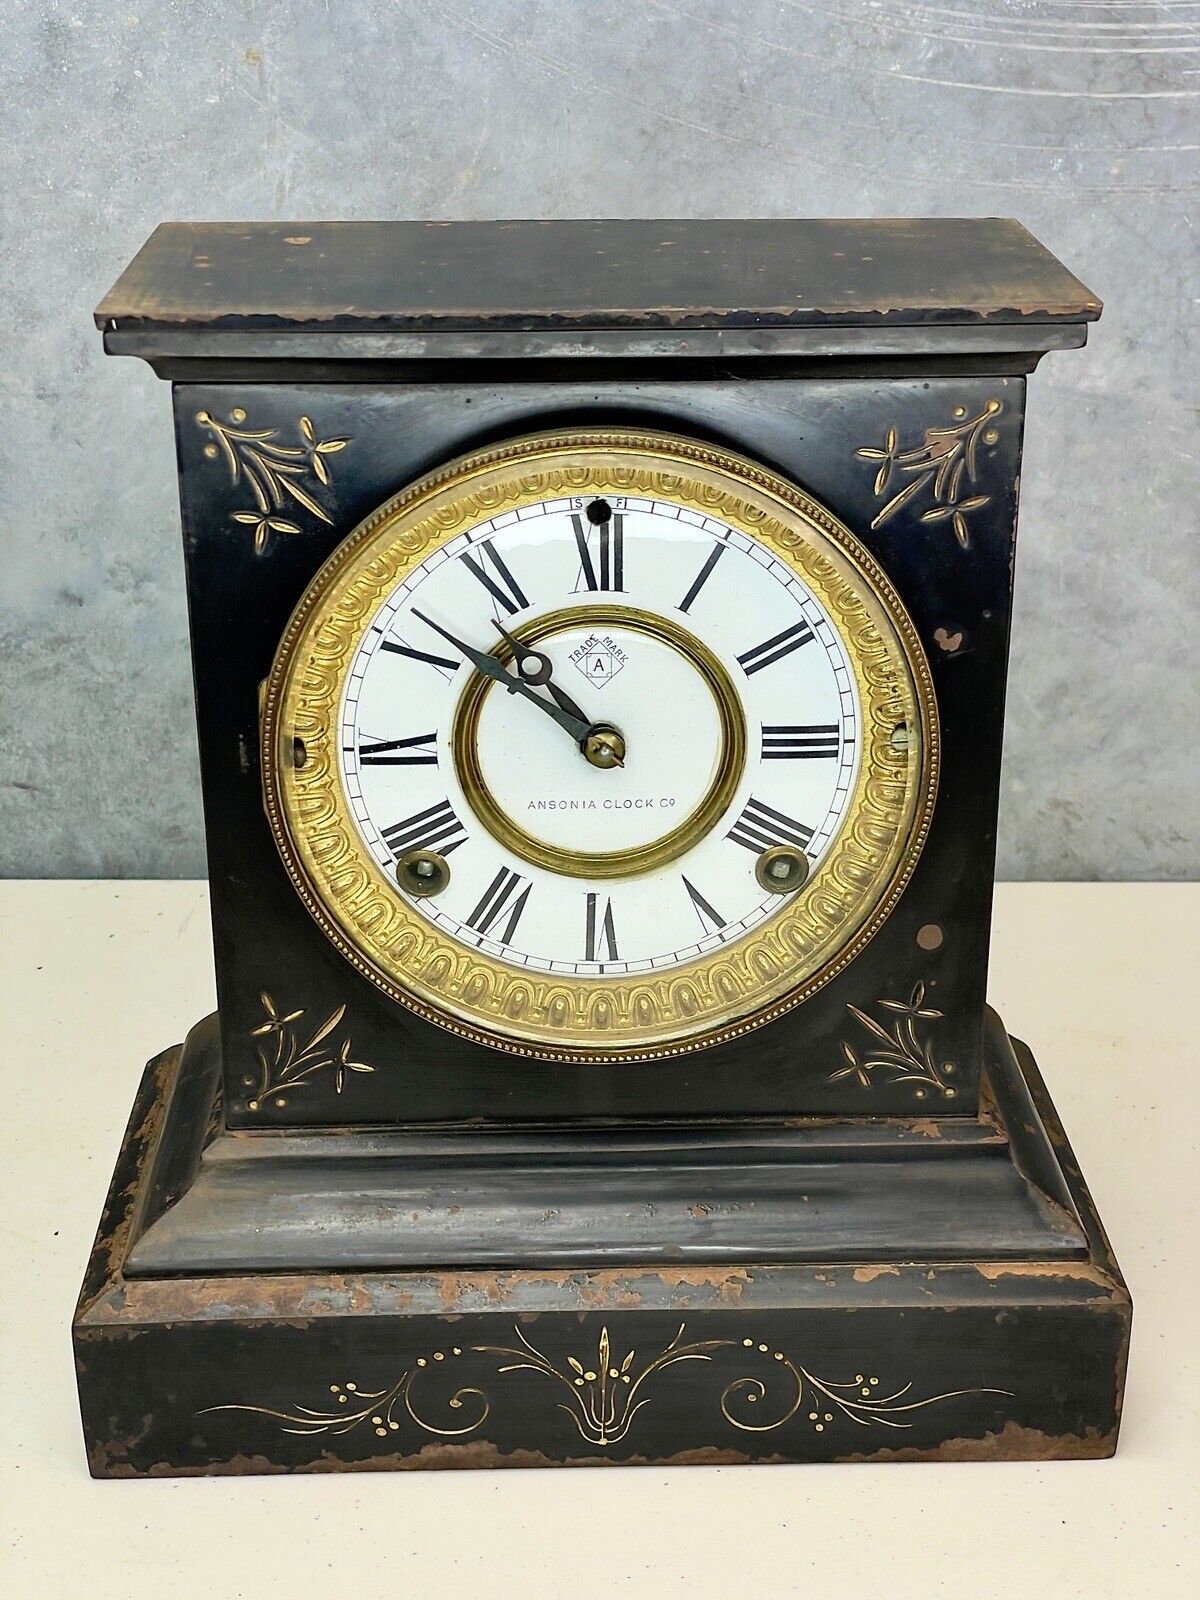 Gorgeous Antique Ansonia Iron Mantle Clock W/ Key, For Repair / Untested.